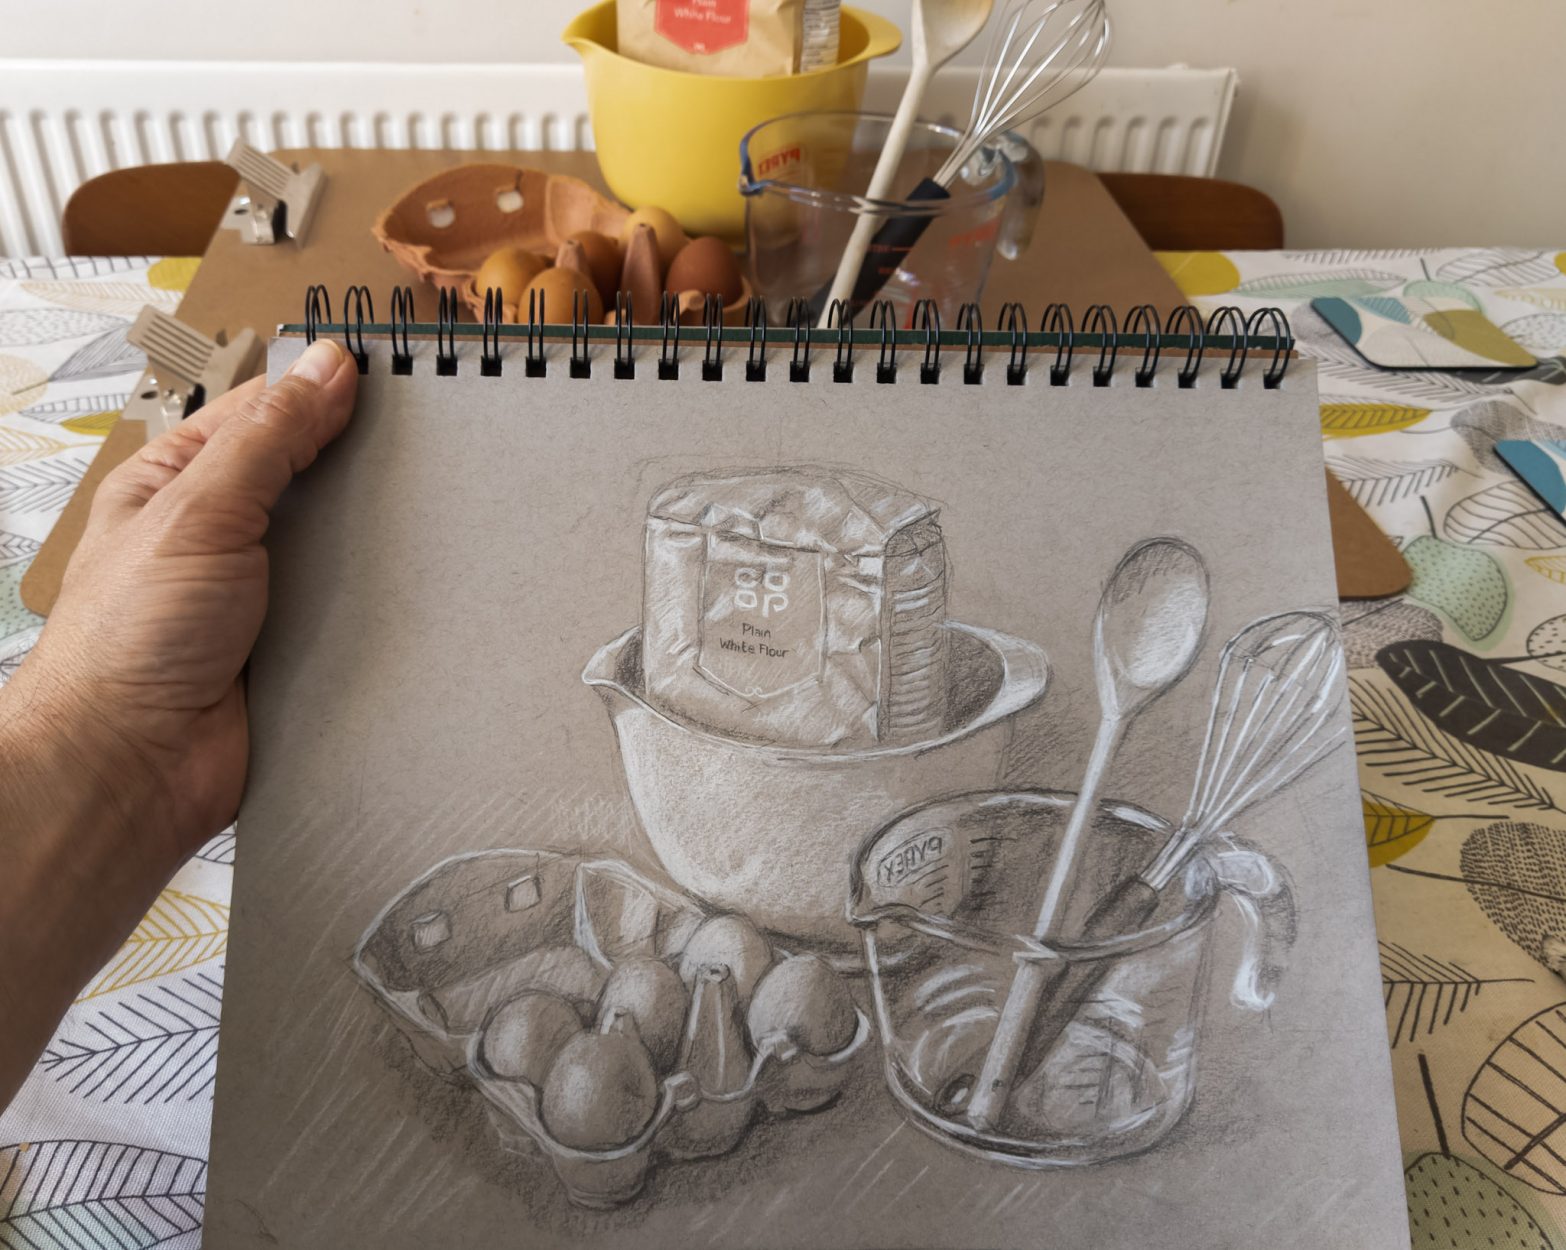 a drawing of eggs and flour made during lockdown. This was the first day the artist could actually find flour in the shops, after weeks of empty shelves